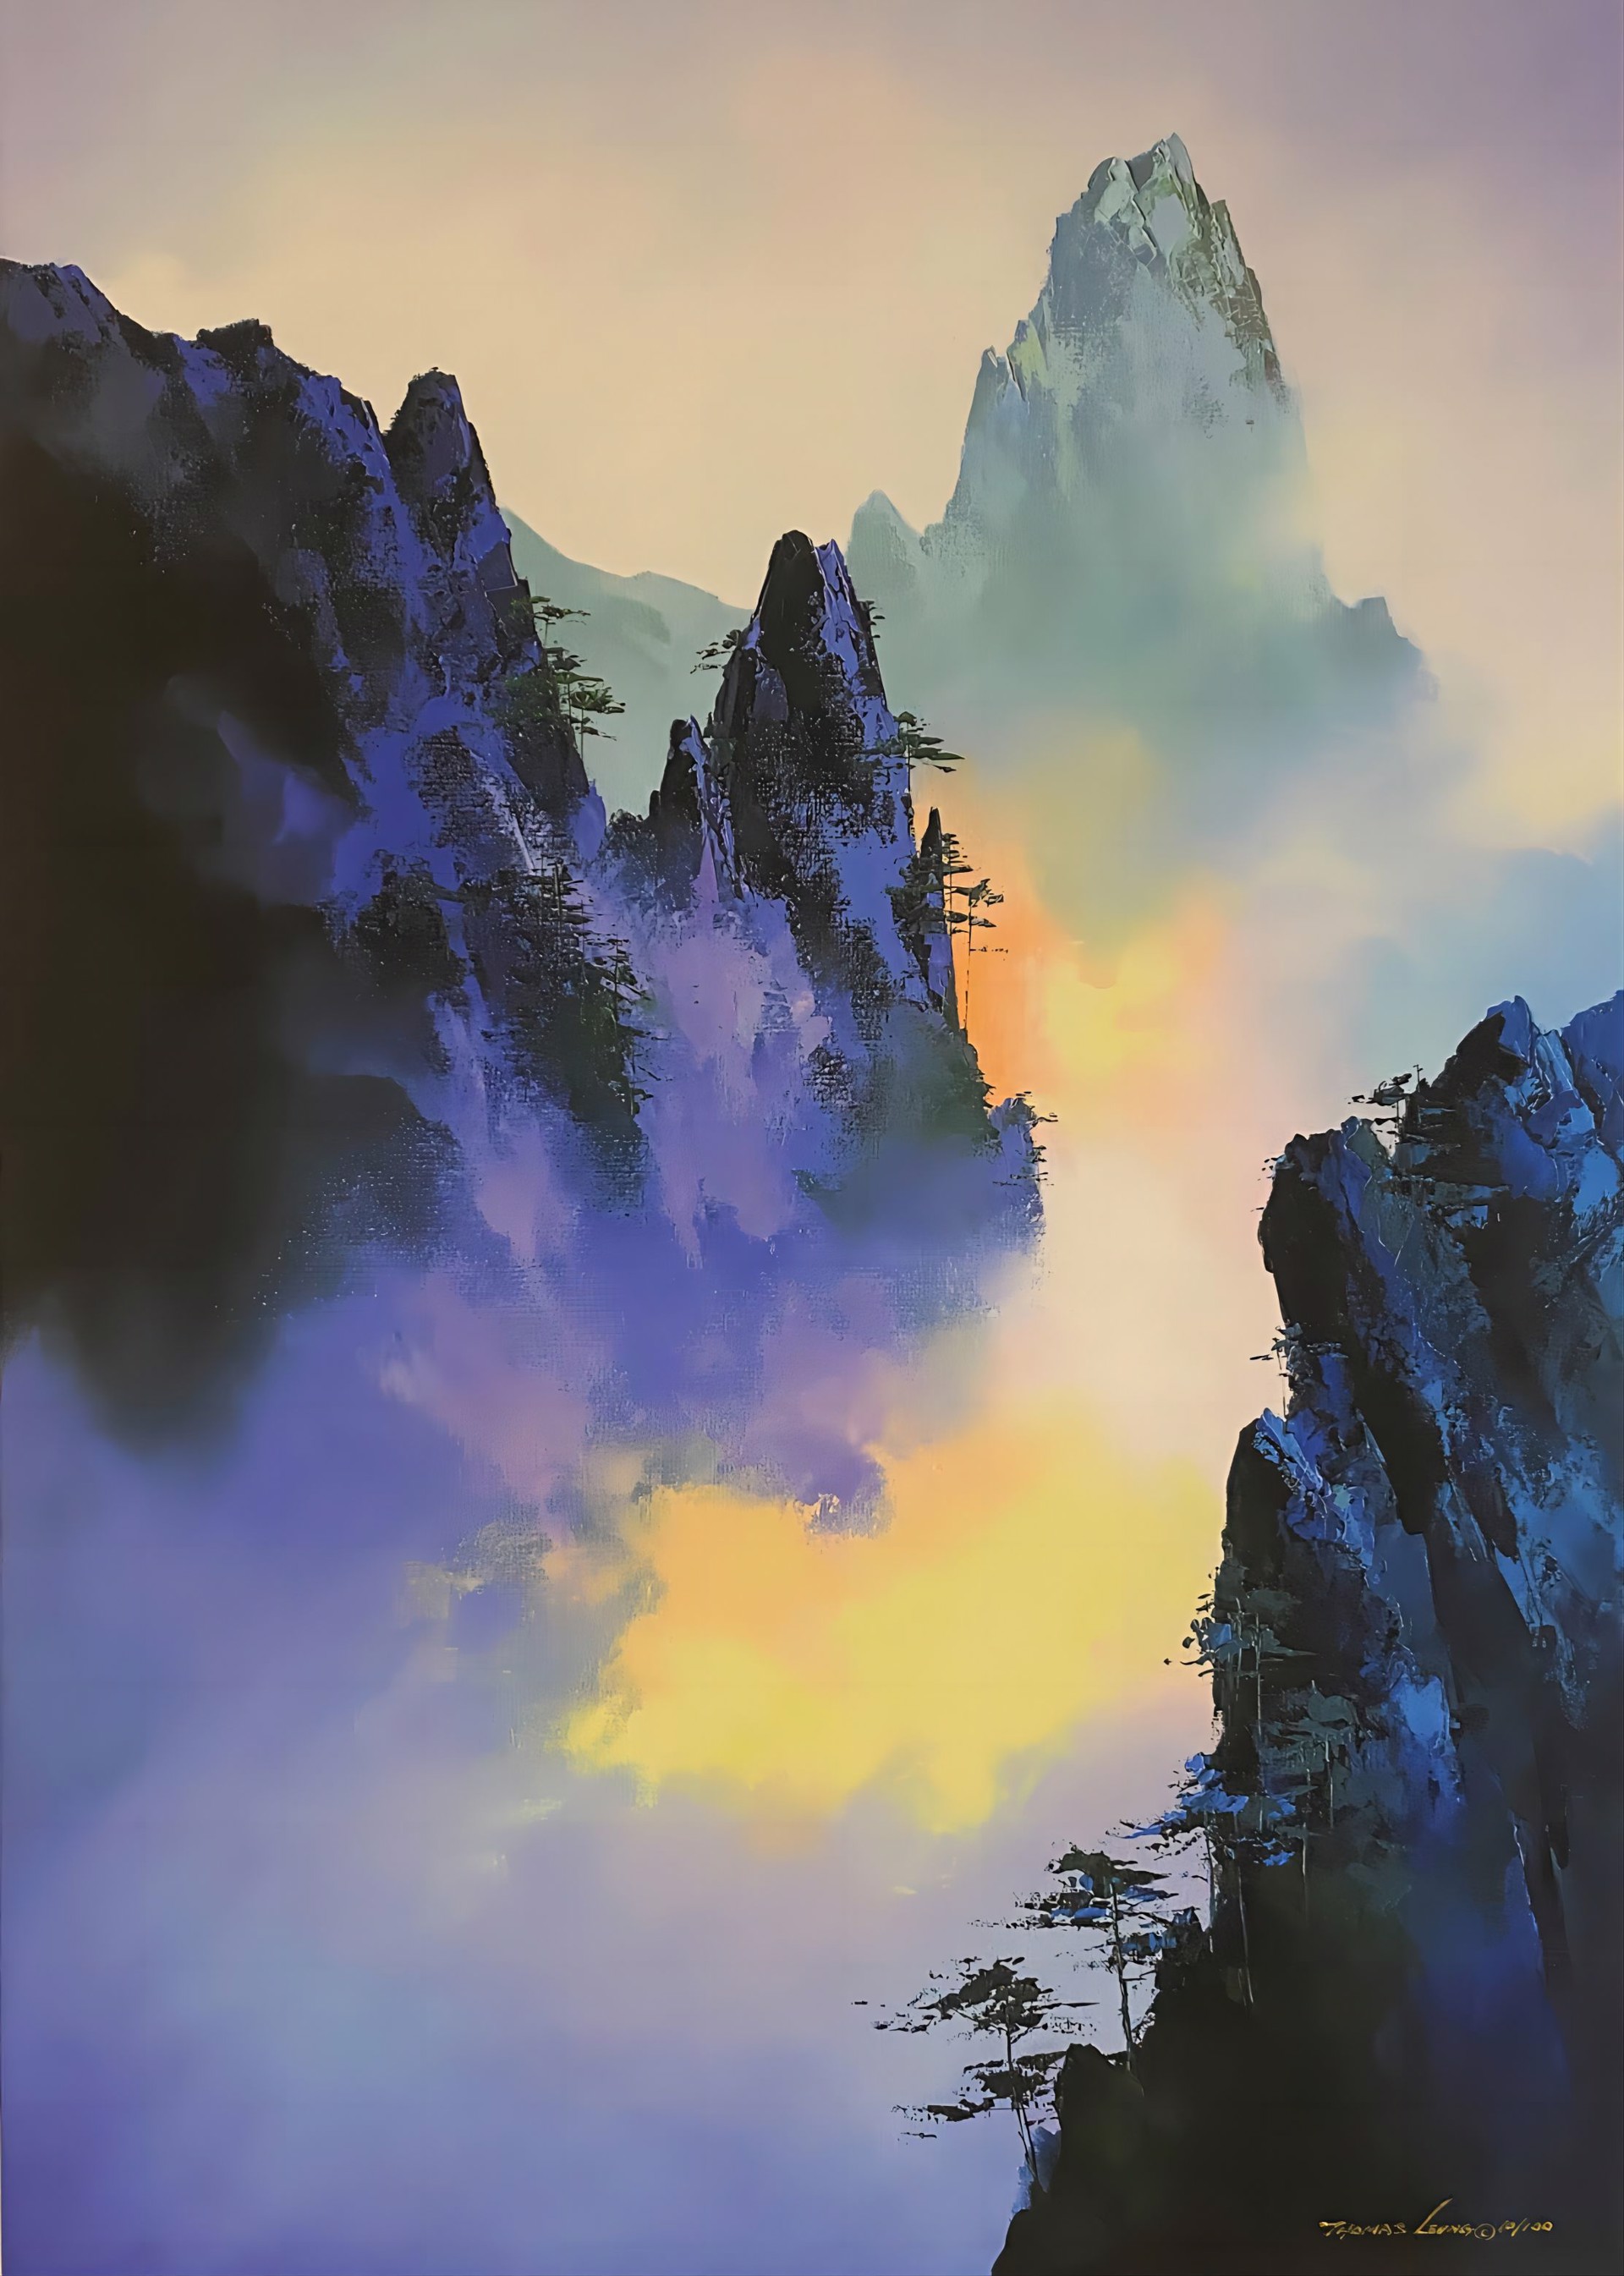 Sea Of Clouds by Thomas Leung